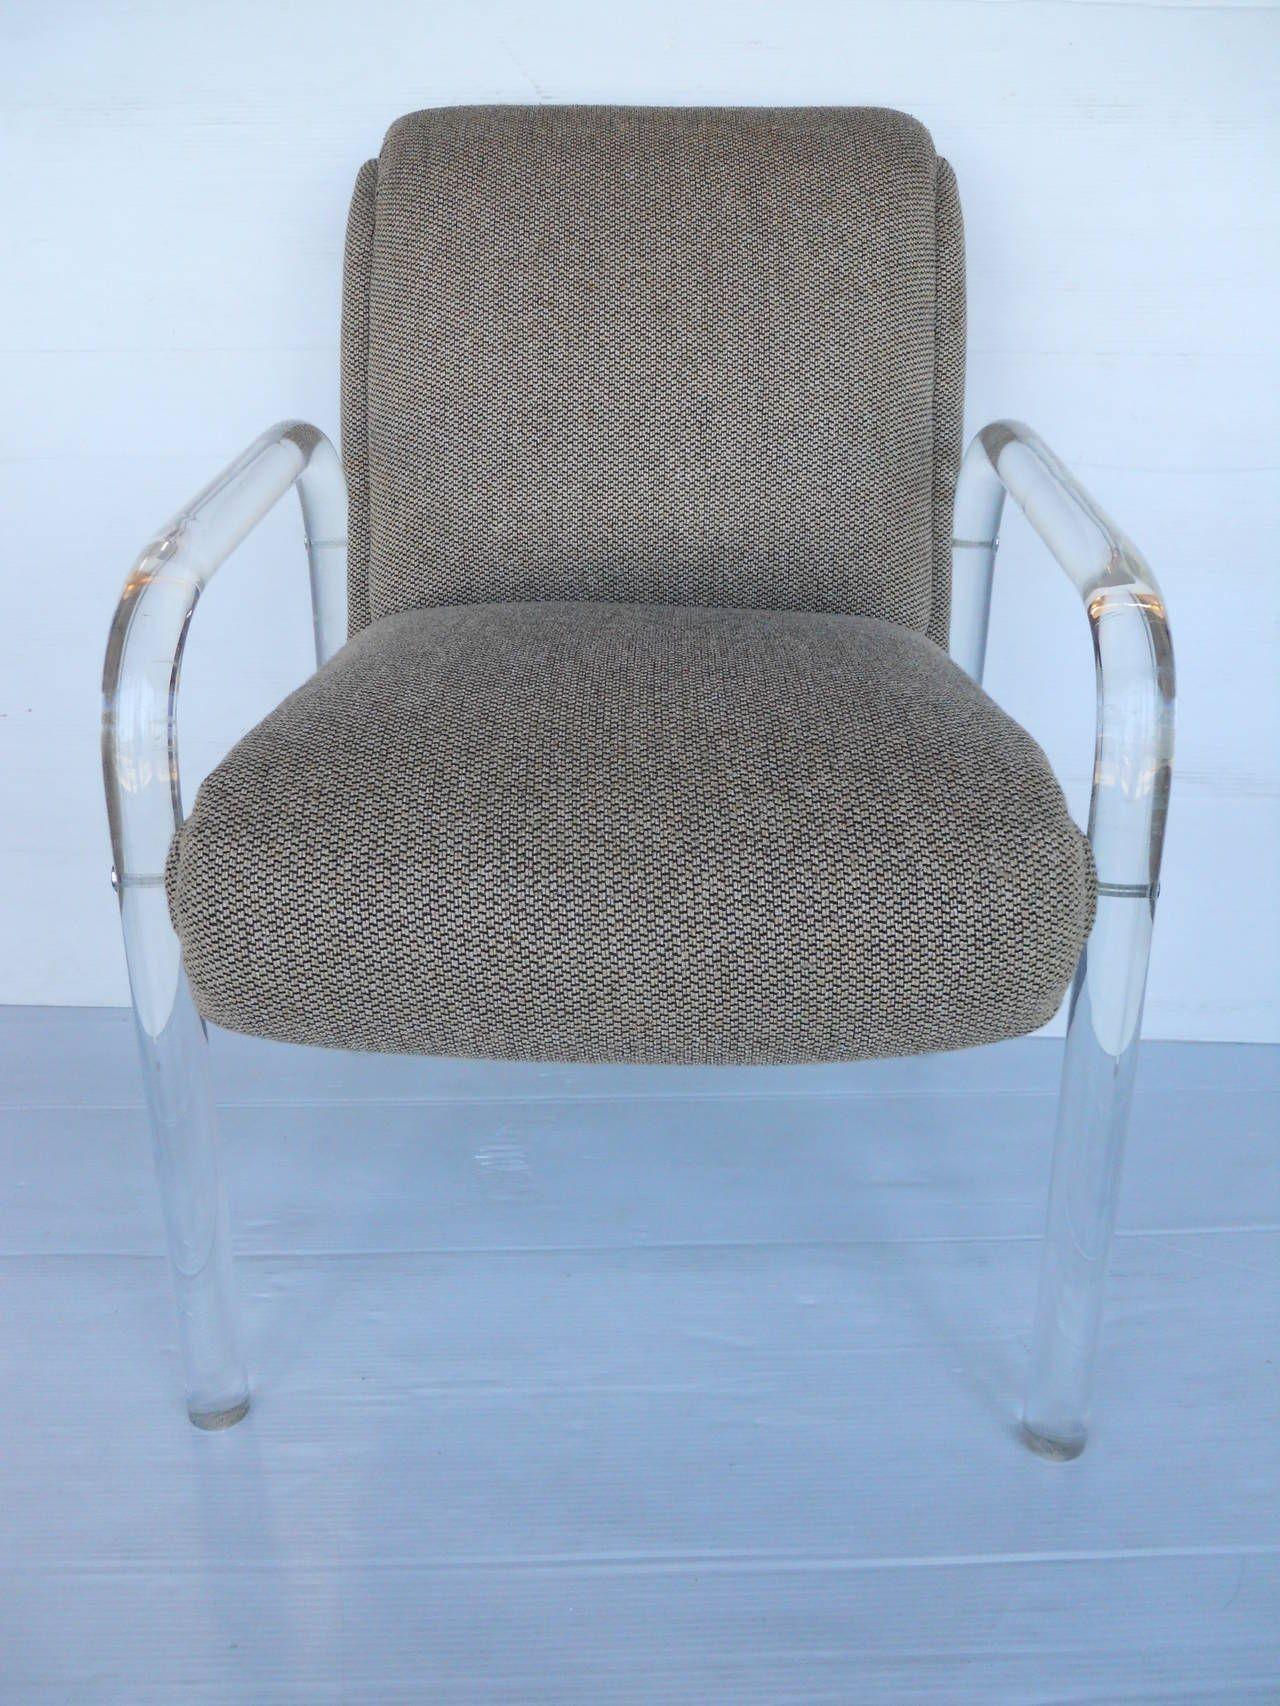 Set of four Lucite dining chairs by Lion in Frost Lucite and woven fabric. Seat depth 19